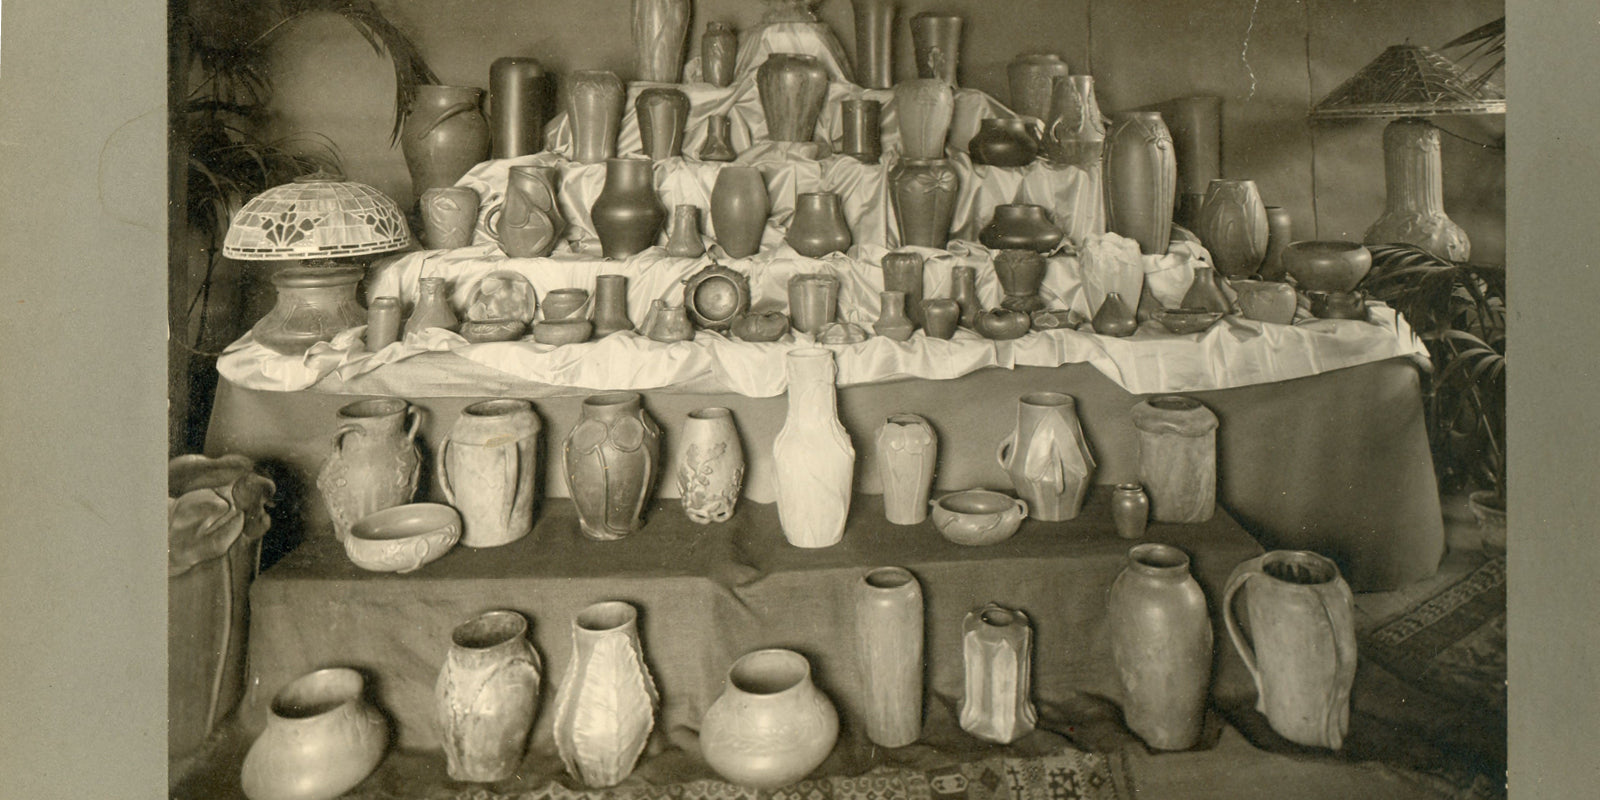 Sepia photo scan of a variety of early Pewabic vases at the Stable Studio in the early 1900s.